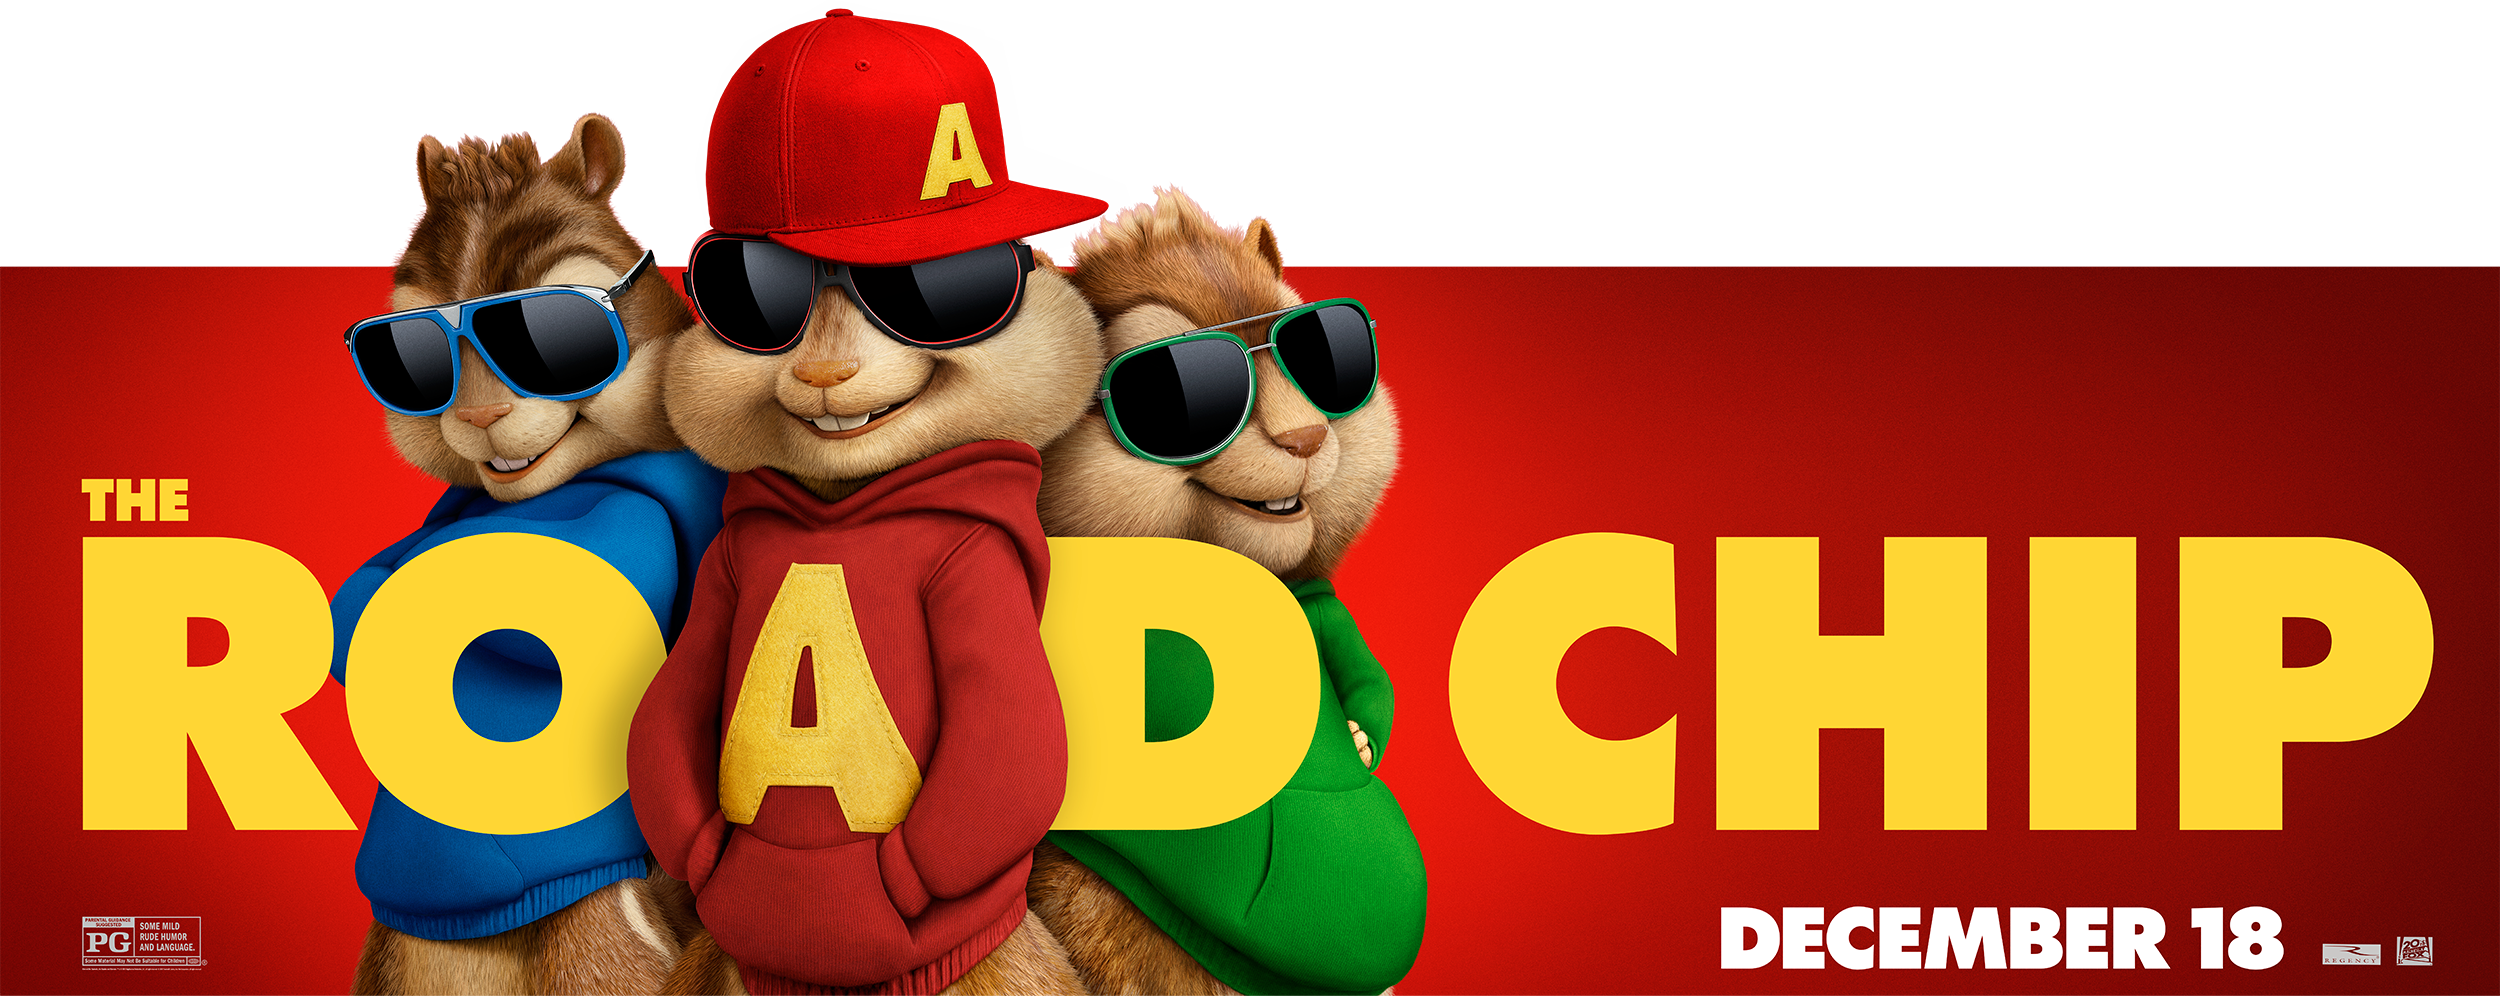 Alvin and the Chipmunks: The Road Chip | Billboard Finishing & Illustration